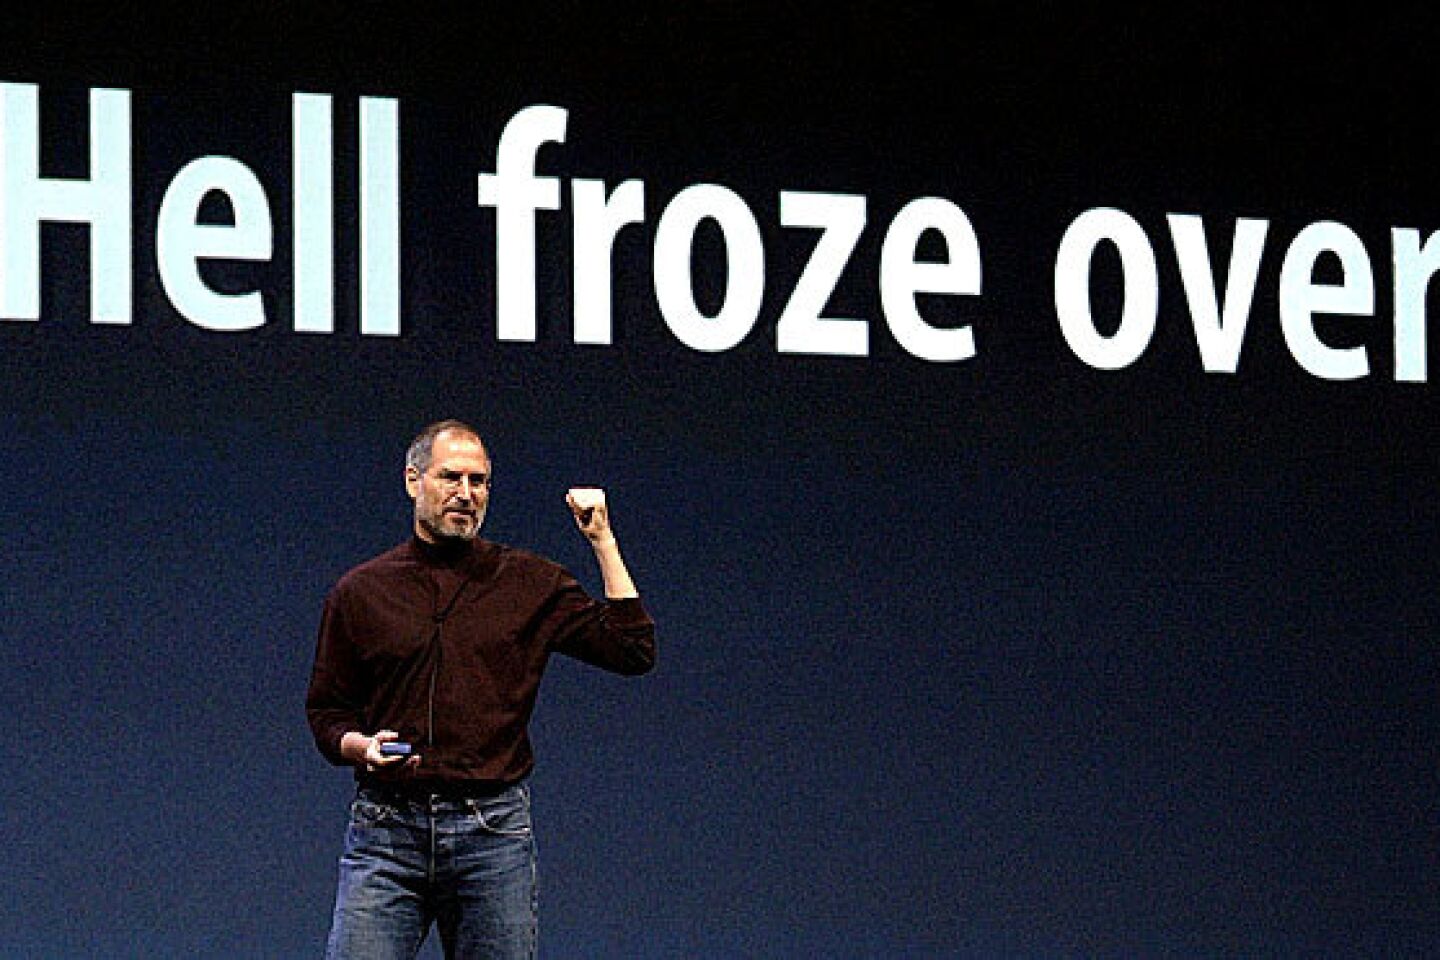 Broadening the reach of the iTunes music store, Jobs announces a Microsoft Windows-compatible version of the popular Internet song-downloading service, which was previously available only on Macintosh operating systems. Compatibility with Windows "is a feature a lot of people thought we'd never have until ... hell froze over," Jobs said.